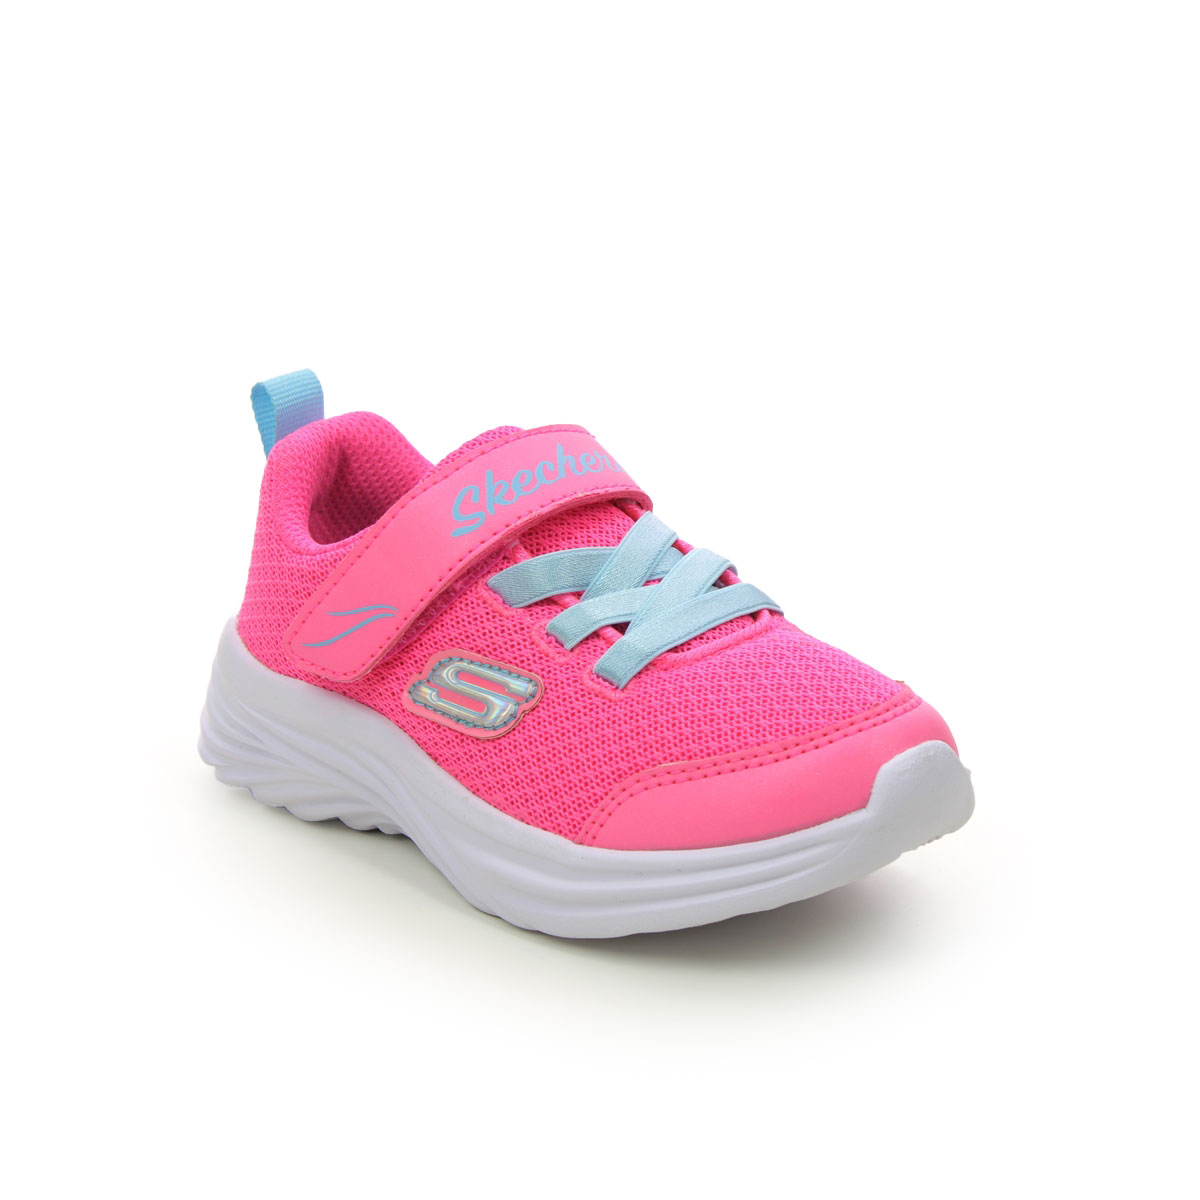 Skechers Dreamy Dancer Infant Pink Turquoise Kids Girls Trainers 302450N In Size 25 In Plain Pink Turquoise